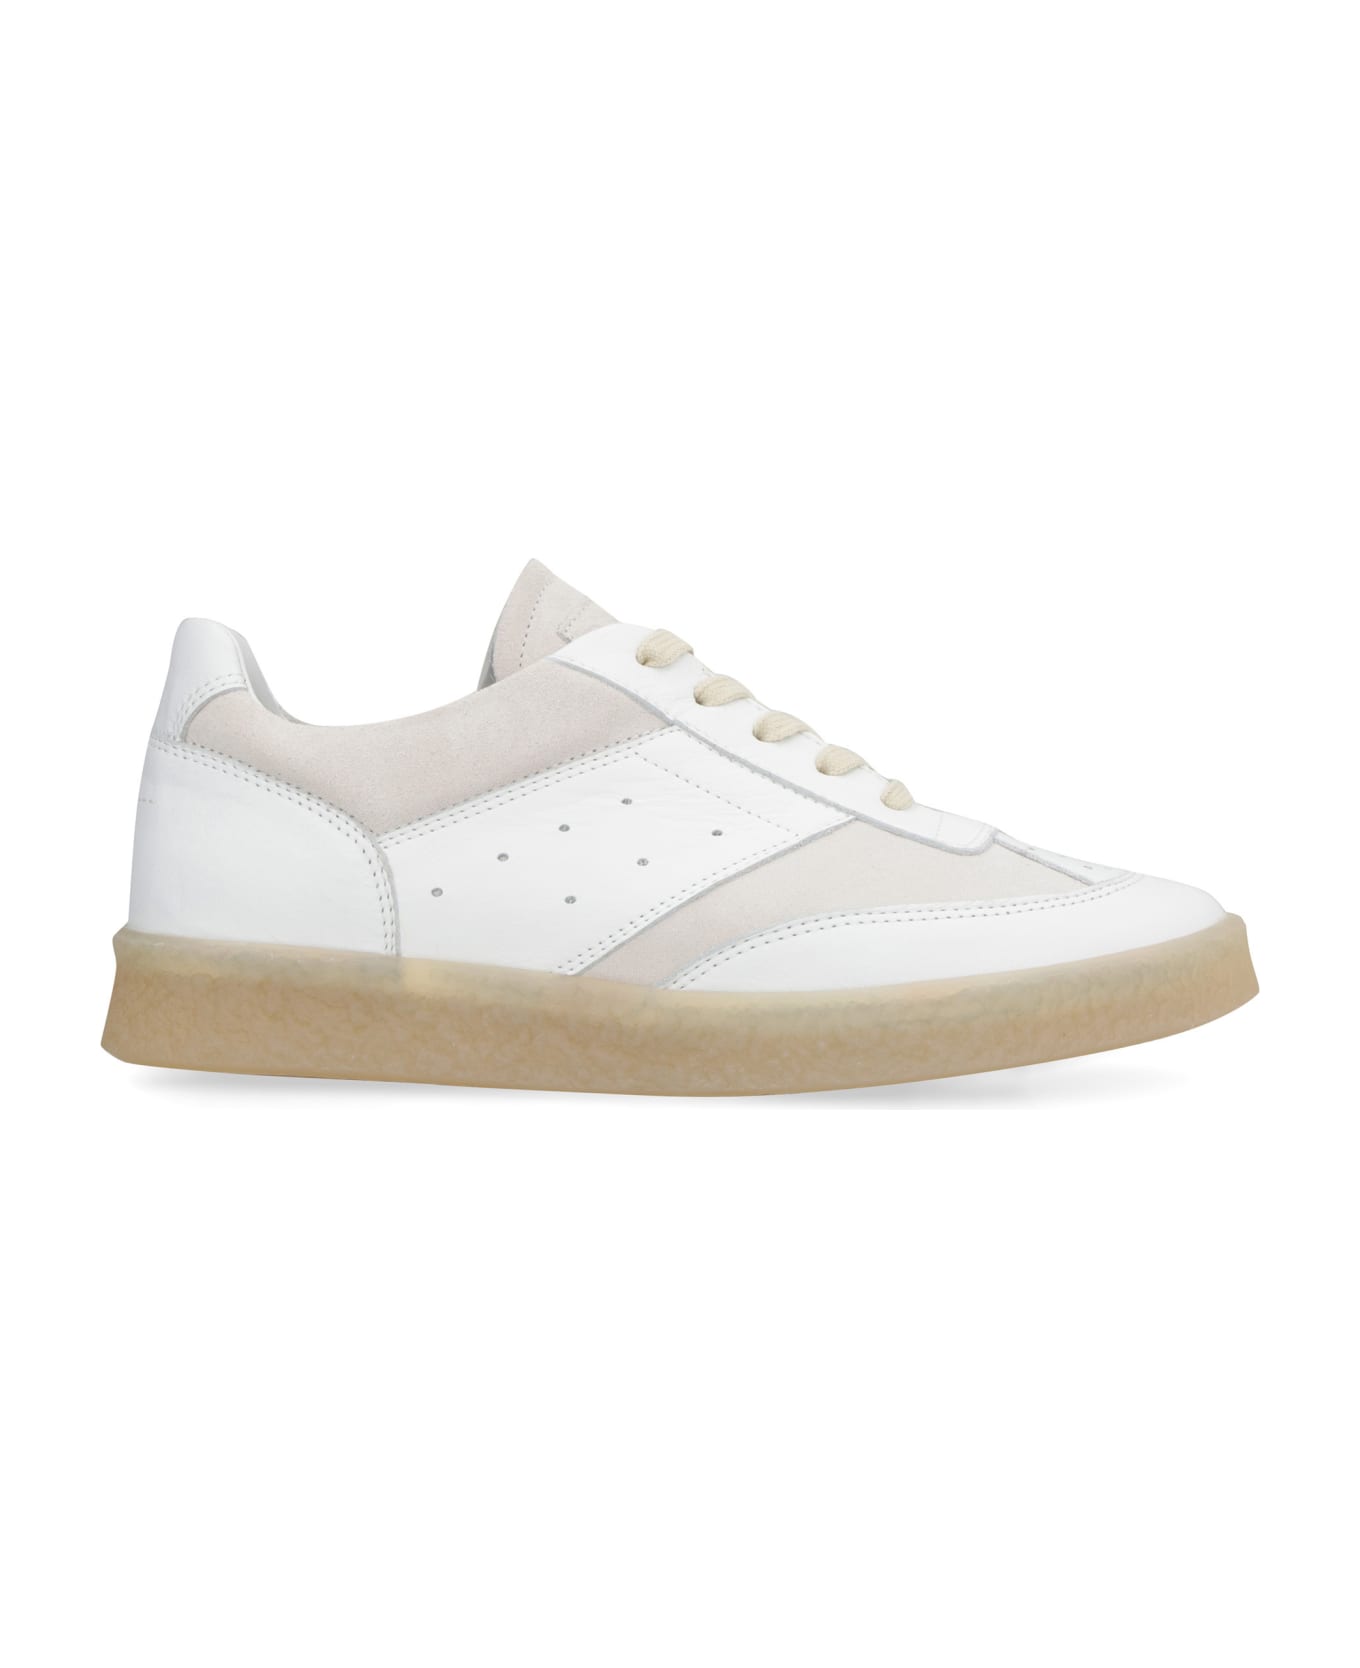 MM6 Maison Margiela Leather And Suede Sneakers - White スニーカー